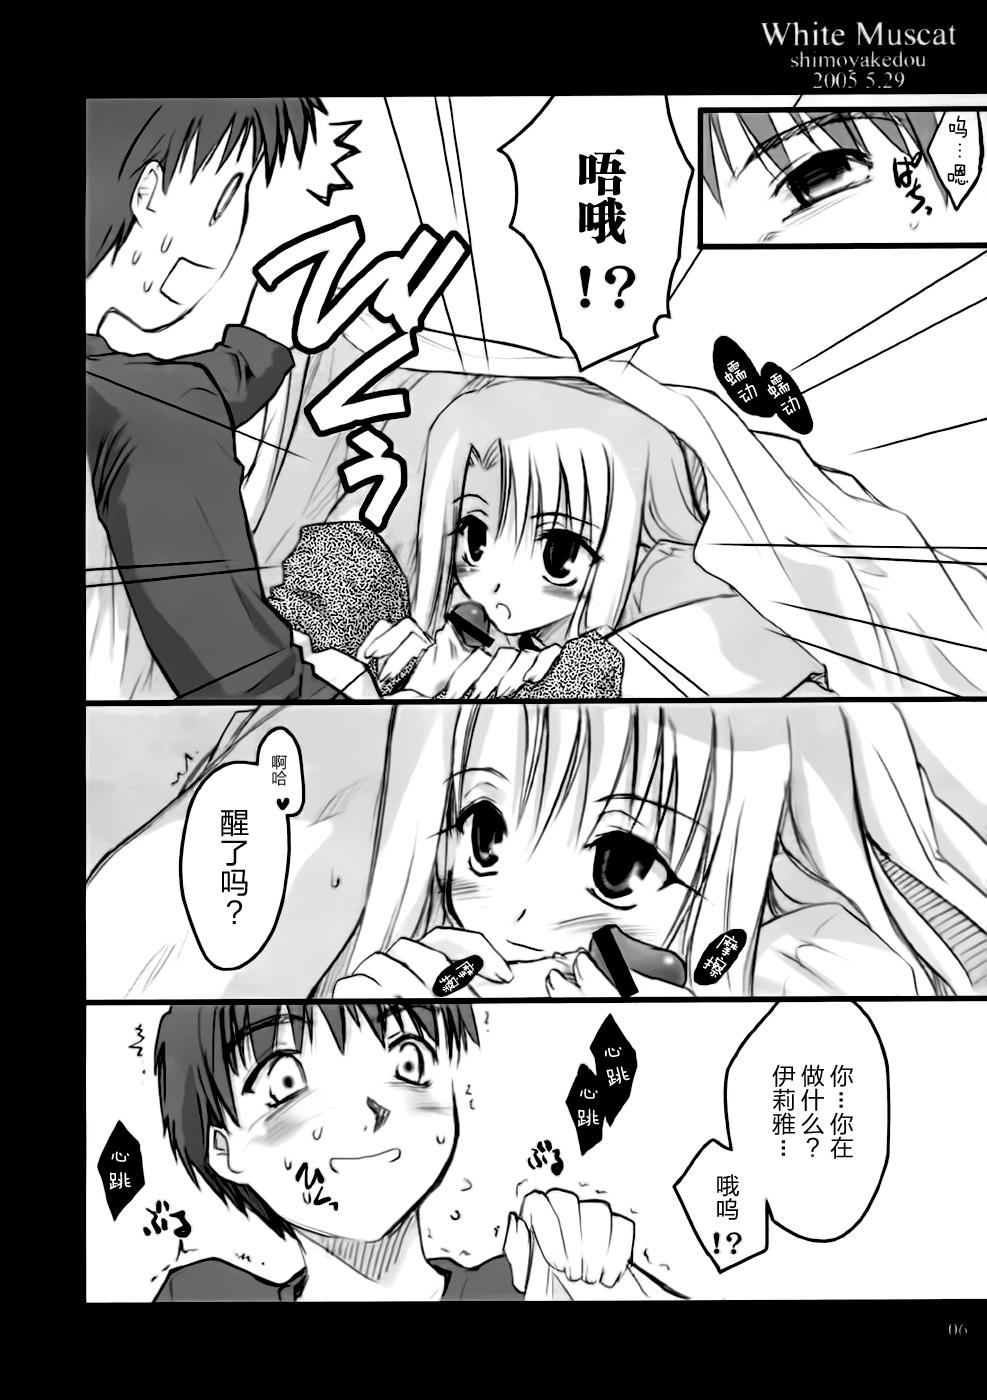 Perfect Teen White Muscat - Fate stay night Teamskeet - Page 6